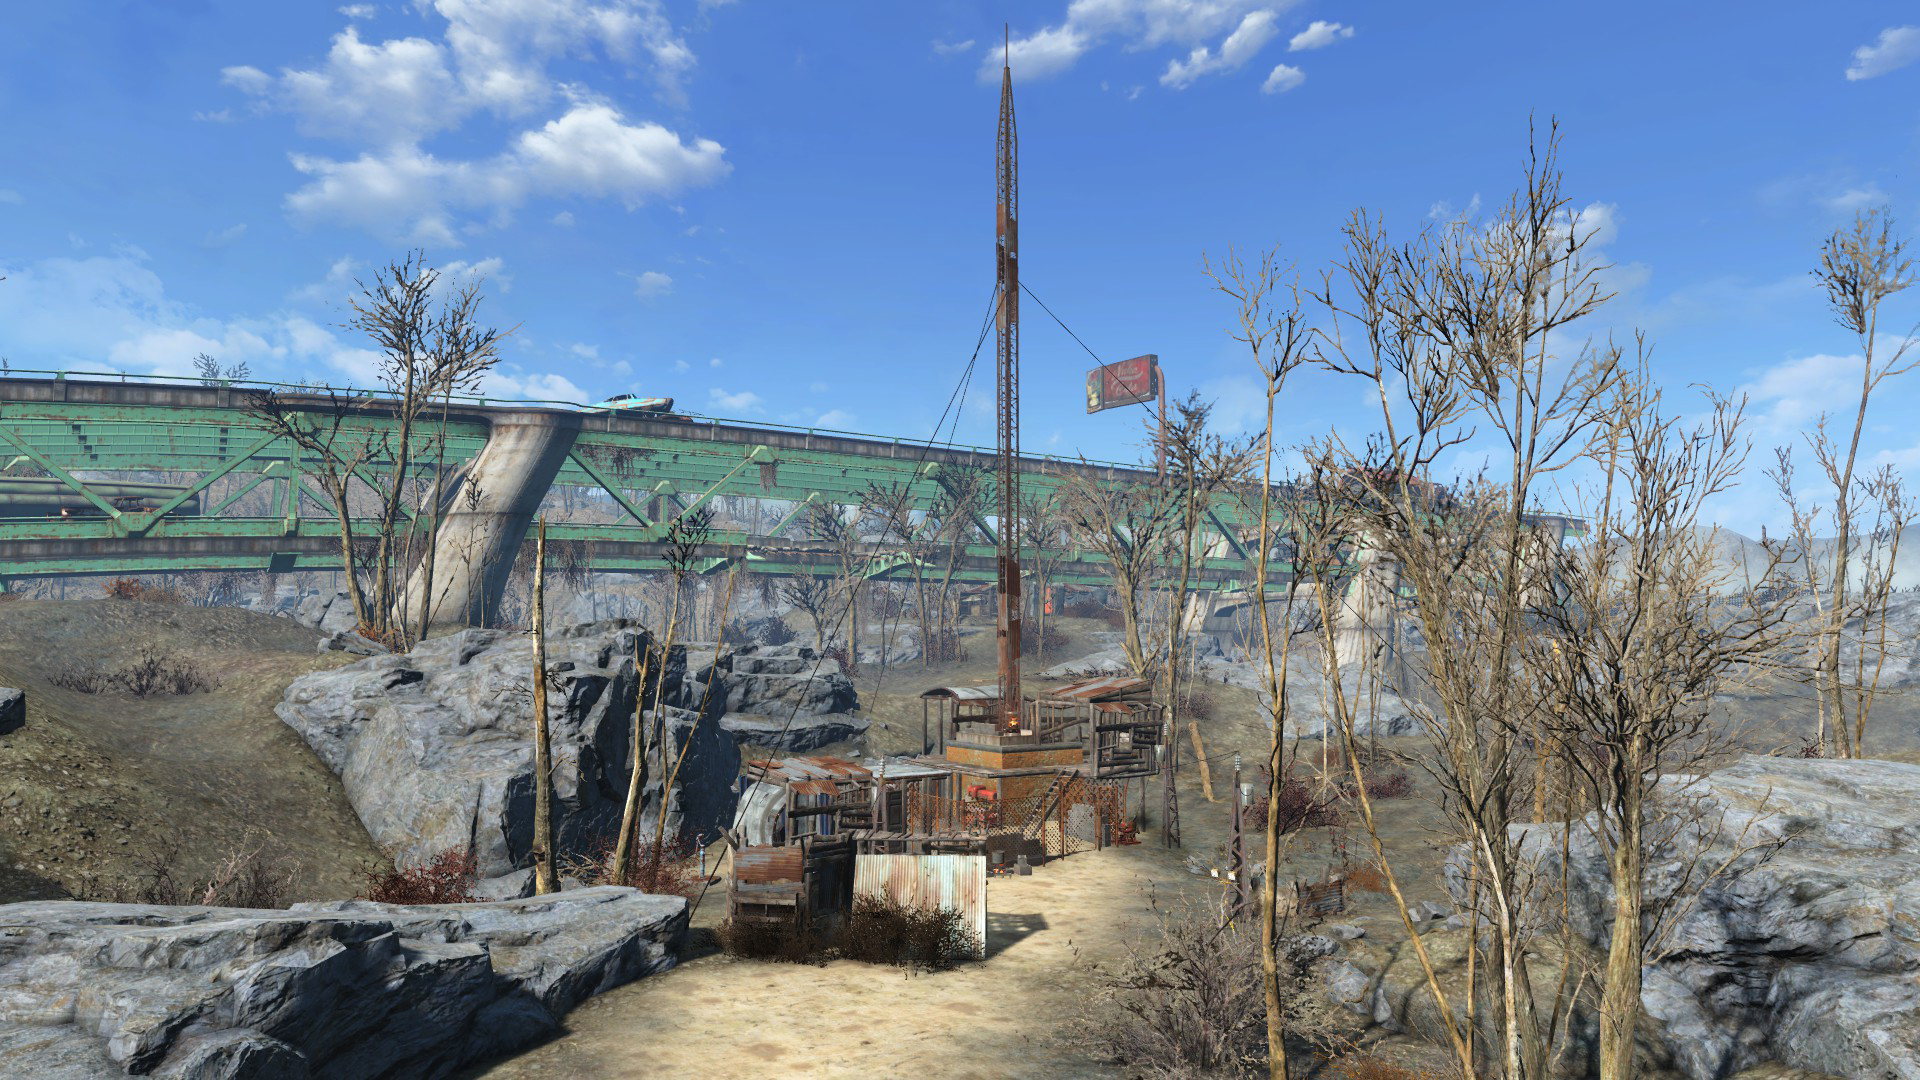 http://vignette1.wikia.nocookie.net/fallout/images/a/ab/Outpost_Zimonja.jpg/revision/latest?cb=20151117031502